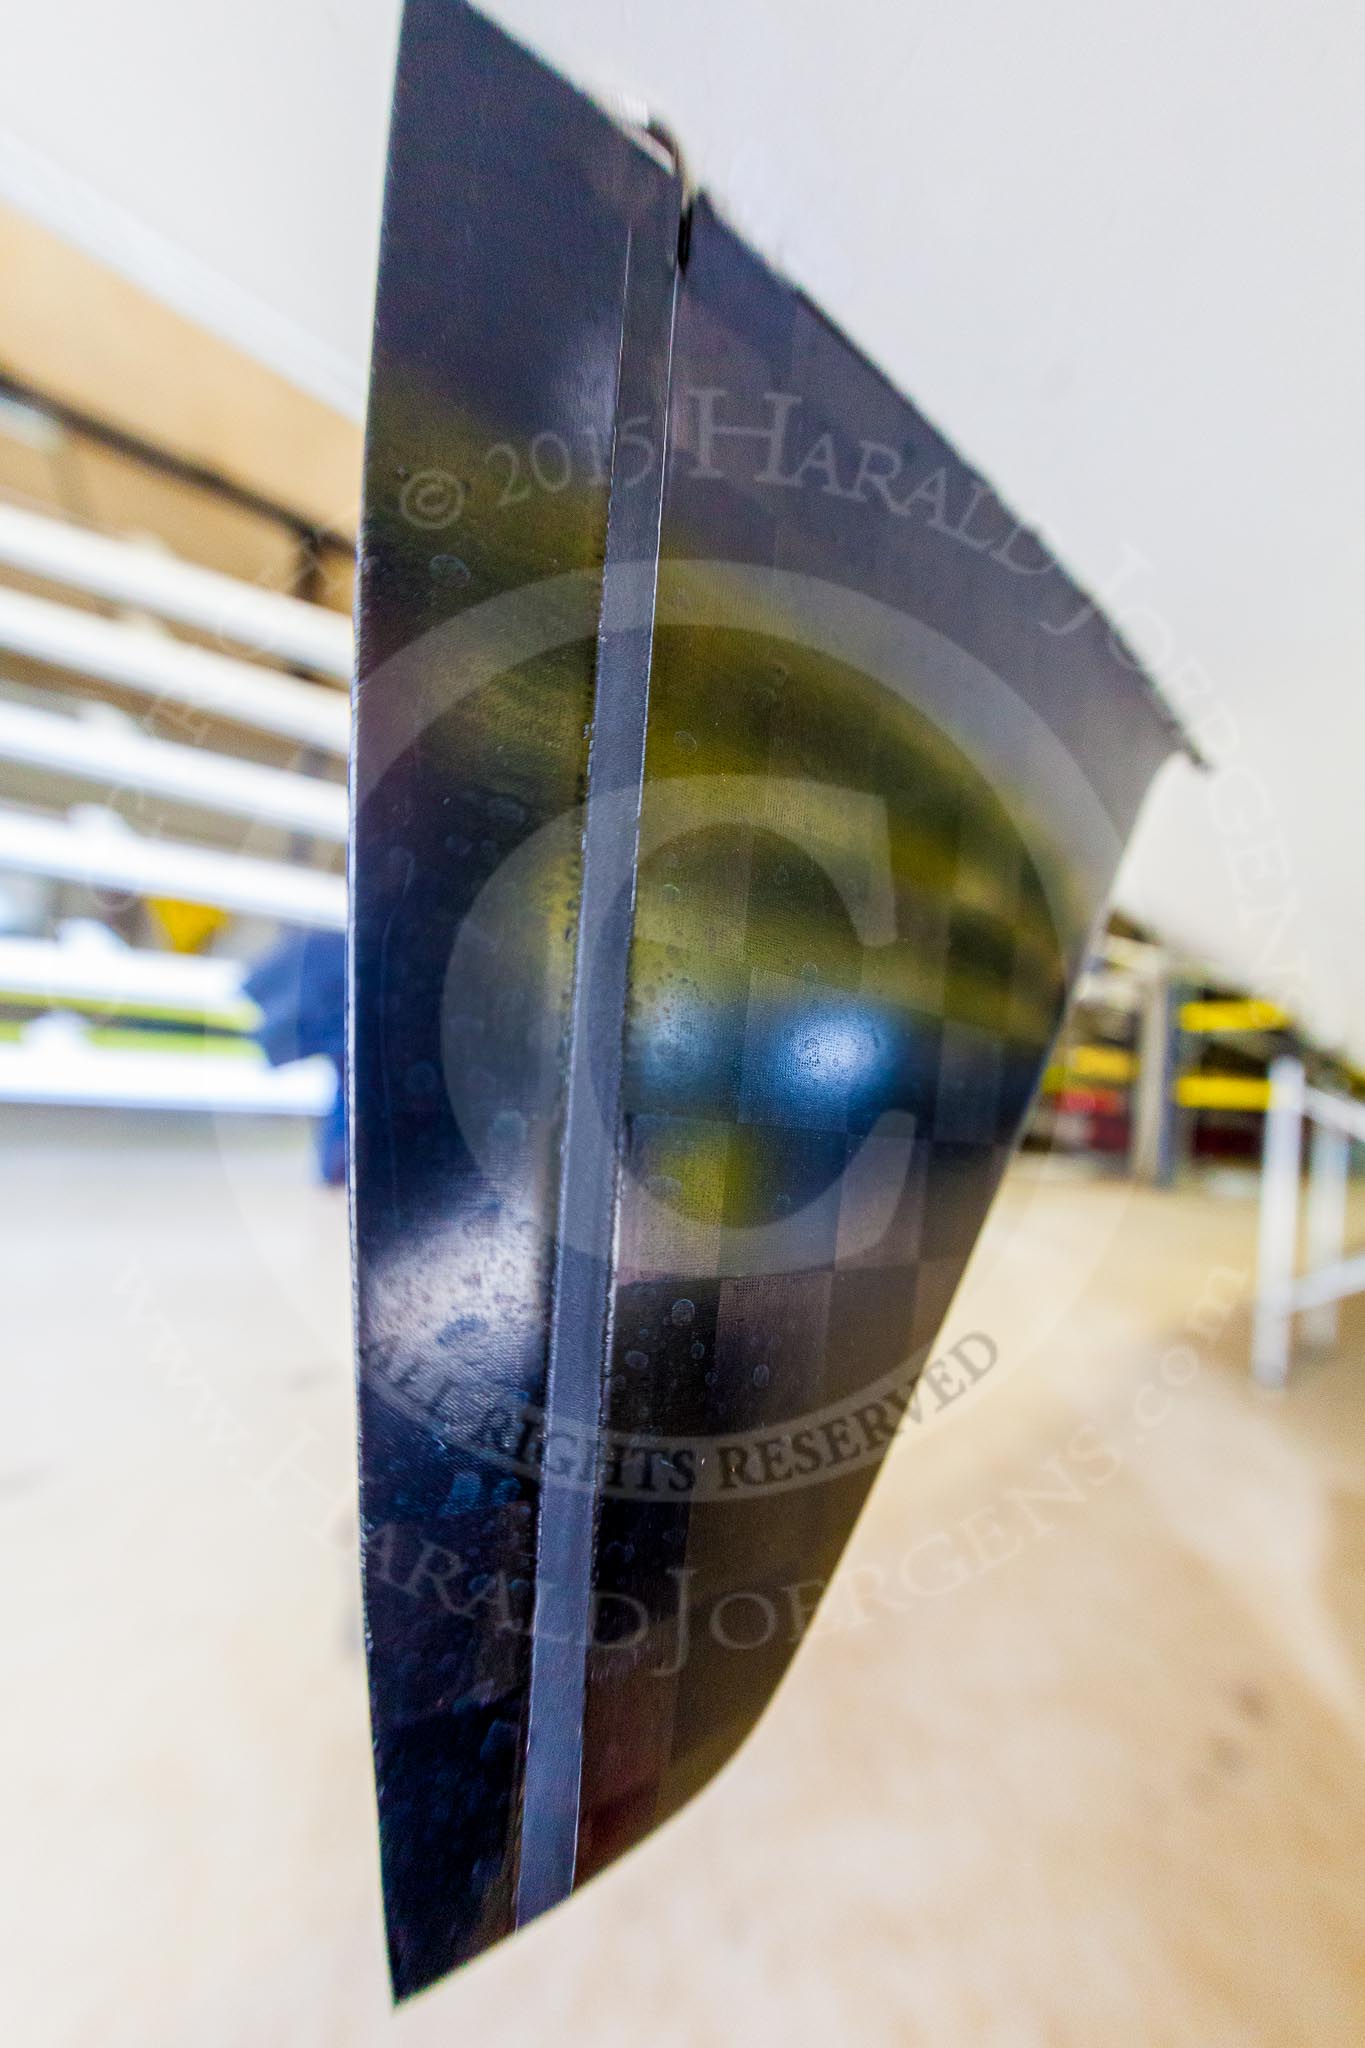 The Boat Race season 2016 - OUWBC training Wallingford: The carbon fibre rudder of a modern boat. Only the narrow part see here in front does move..
River Thames,
Wallingford,
Oxfordshire,

on 29 February 2016 at 14:11, image #1